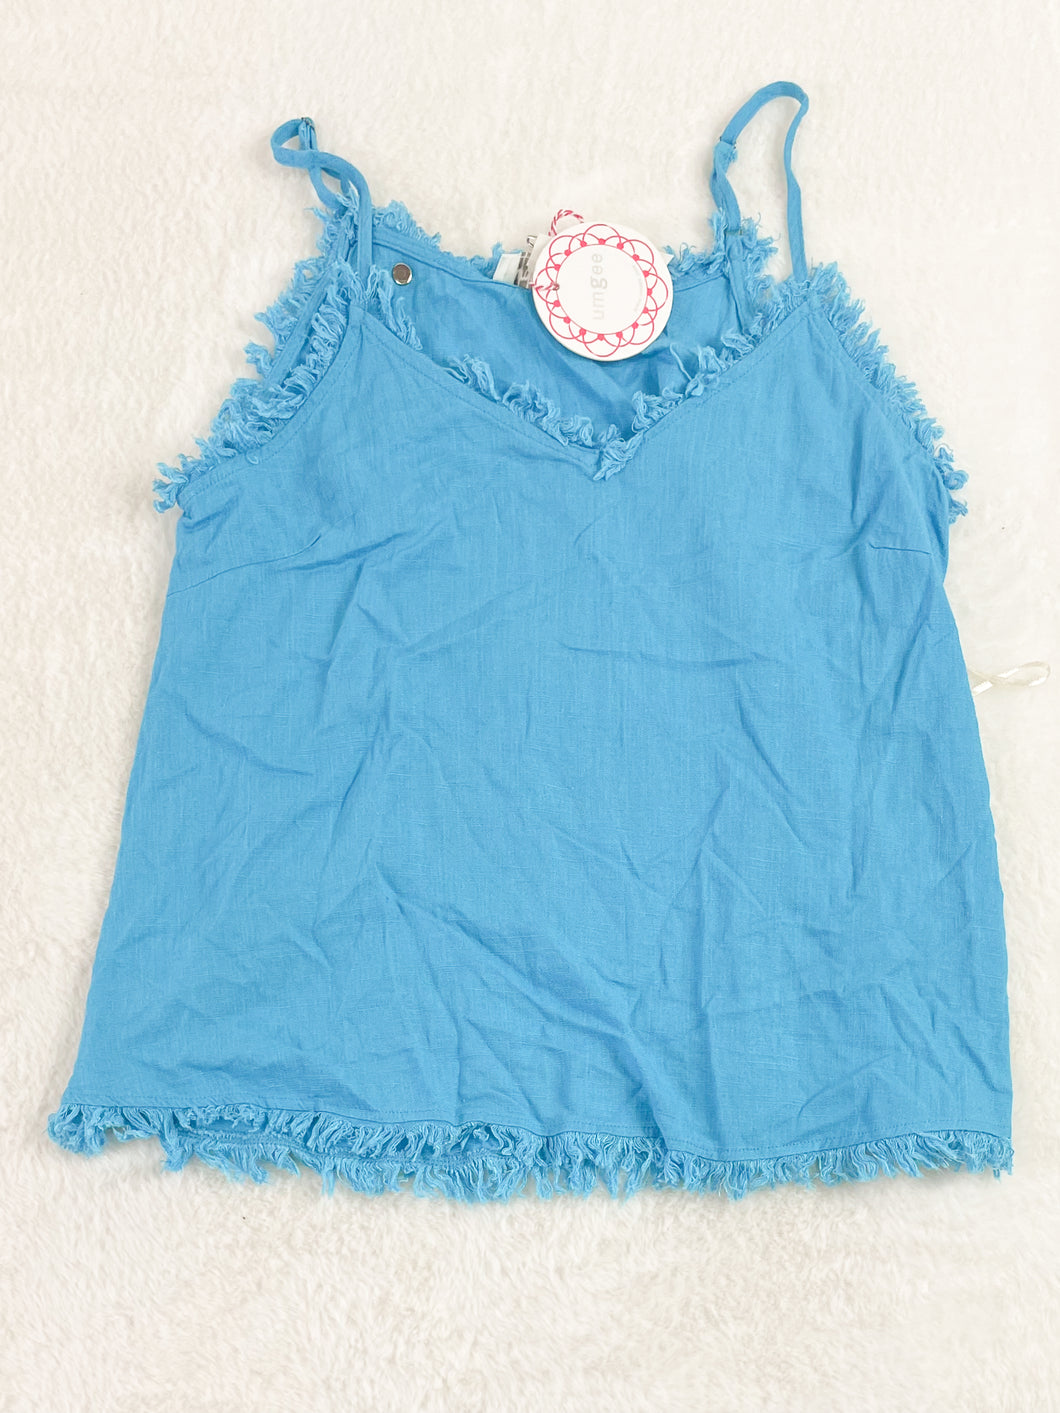 Umgee Tank Top Size Small *